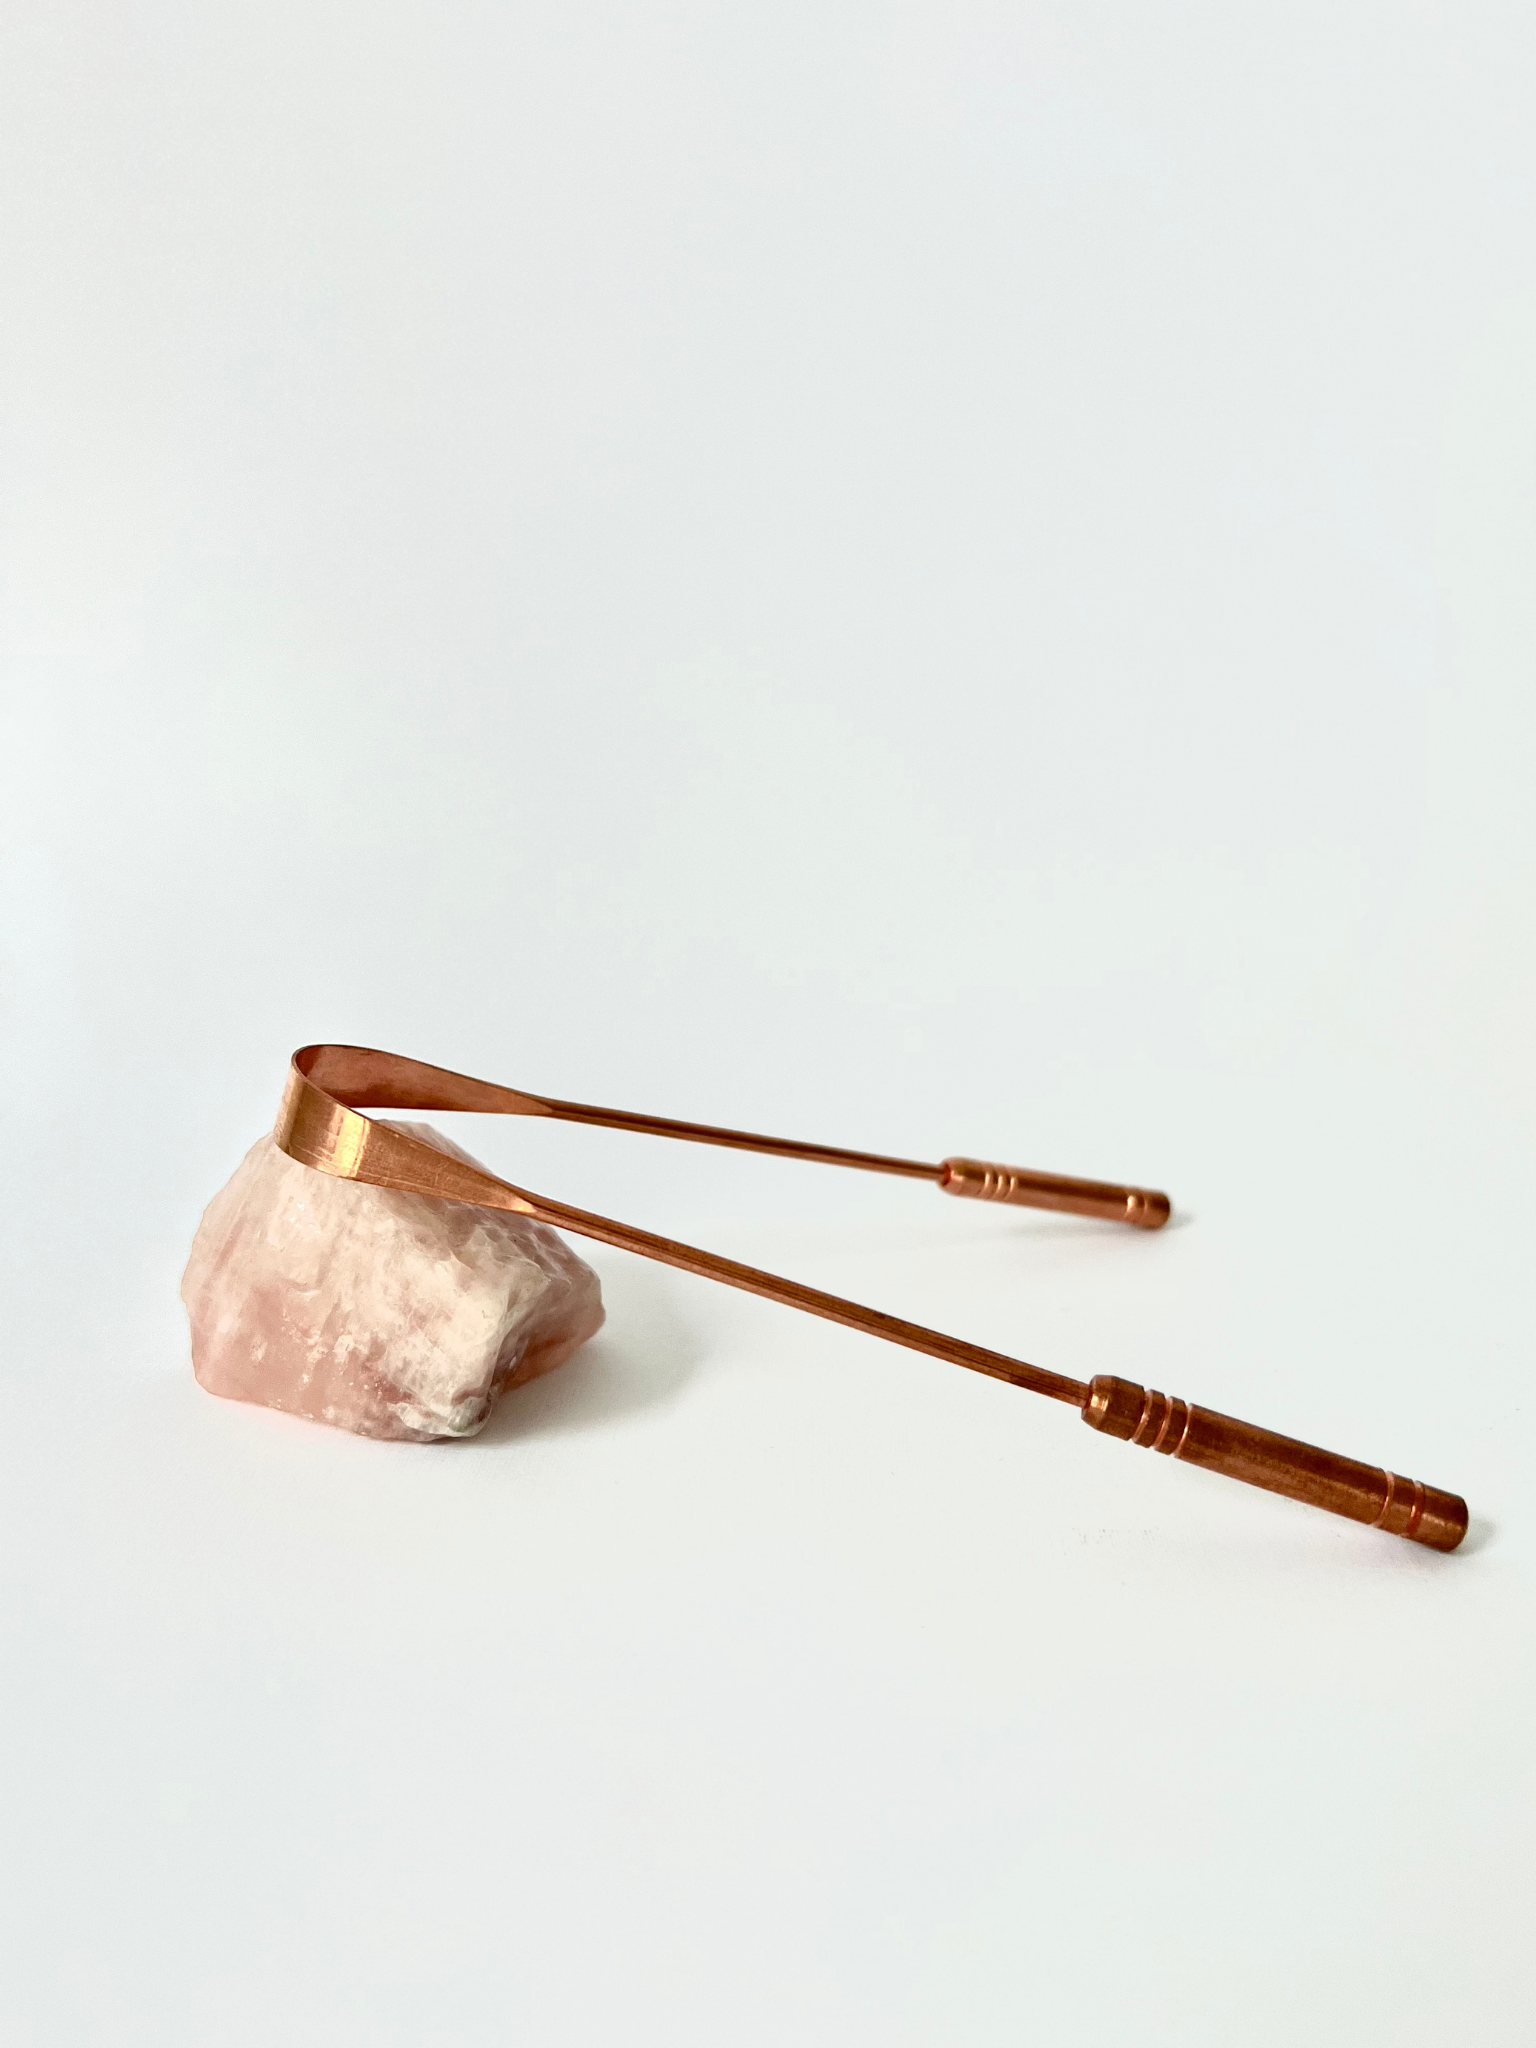 Good Karma Ayurvedic Copper Tongue Scraper Cleaner for Oral health on rose crystal stone